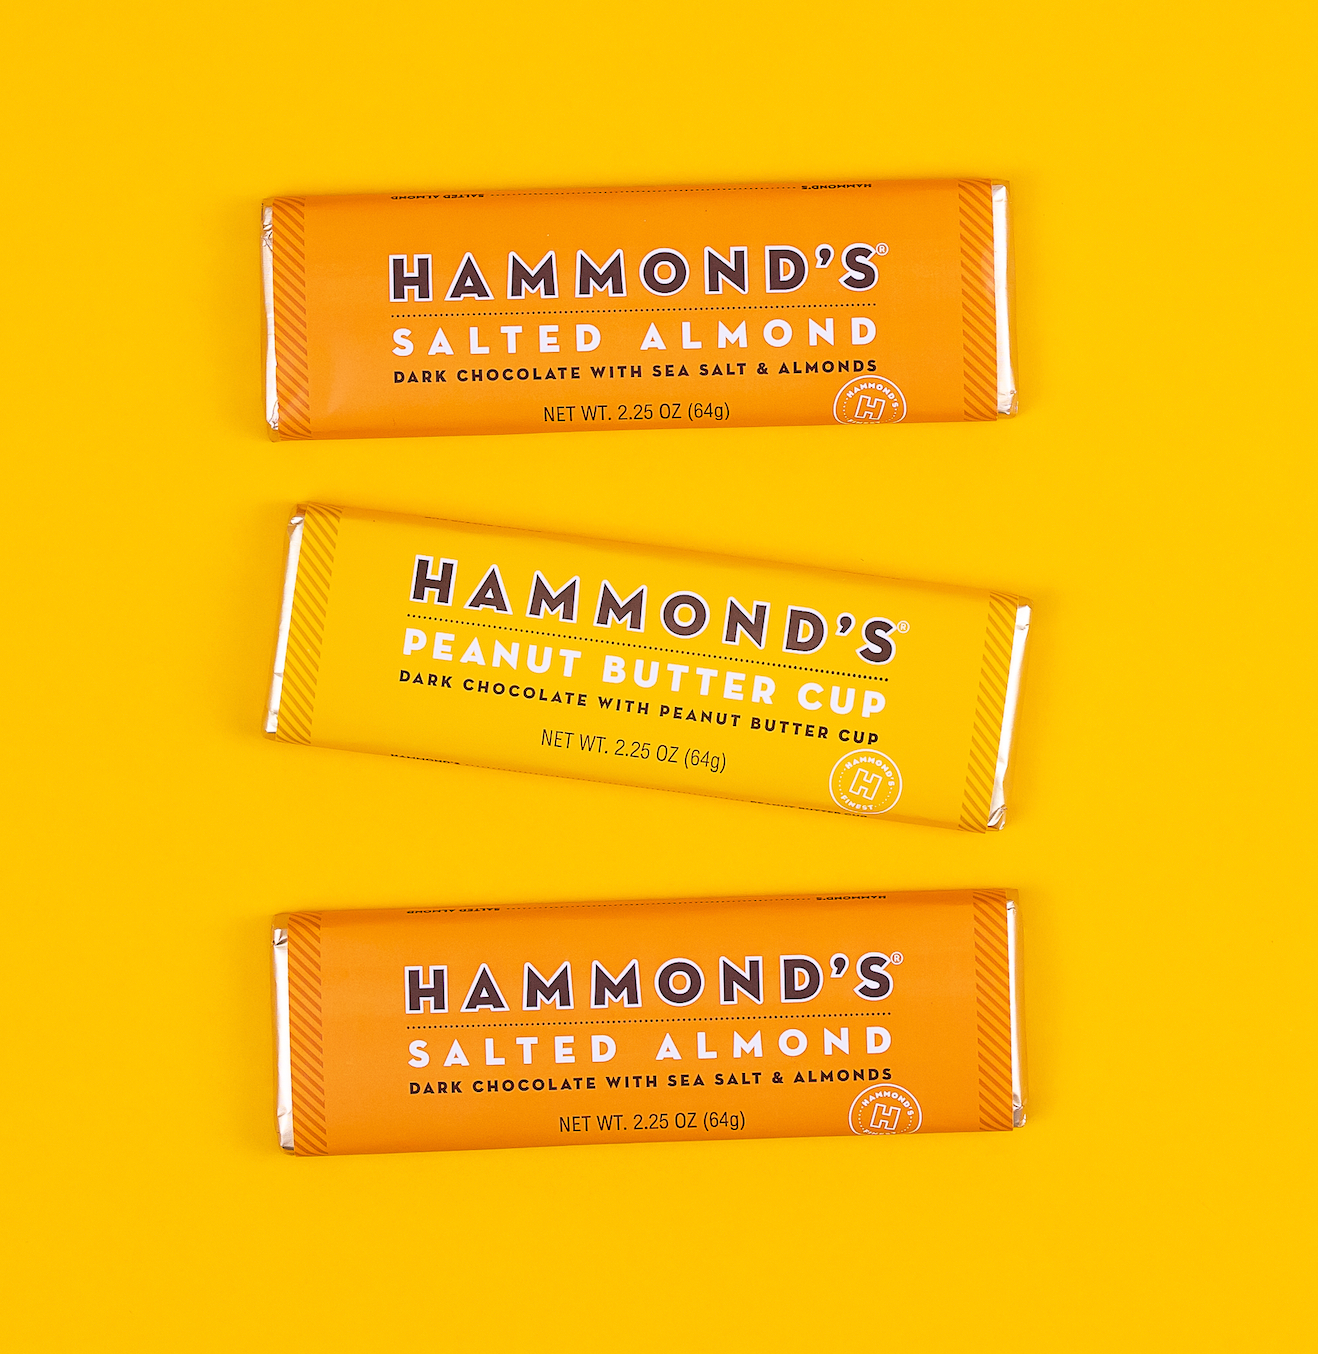 Hammond's Salted Almond and Peanut Butter Cup Bar